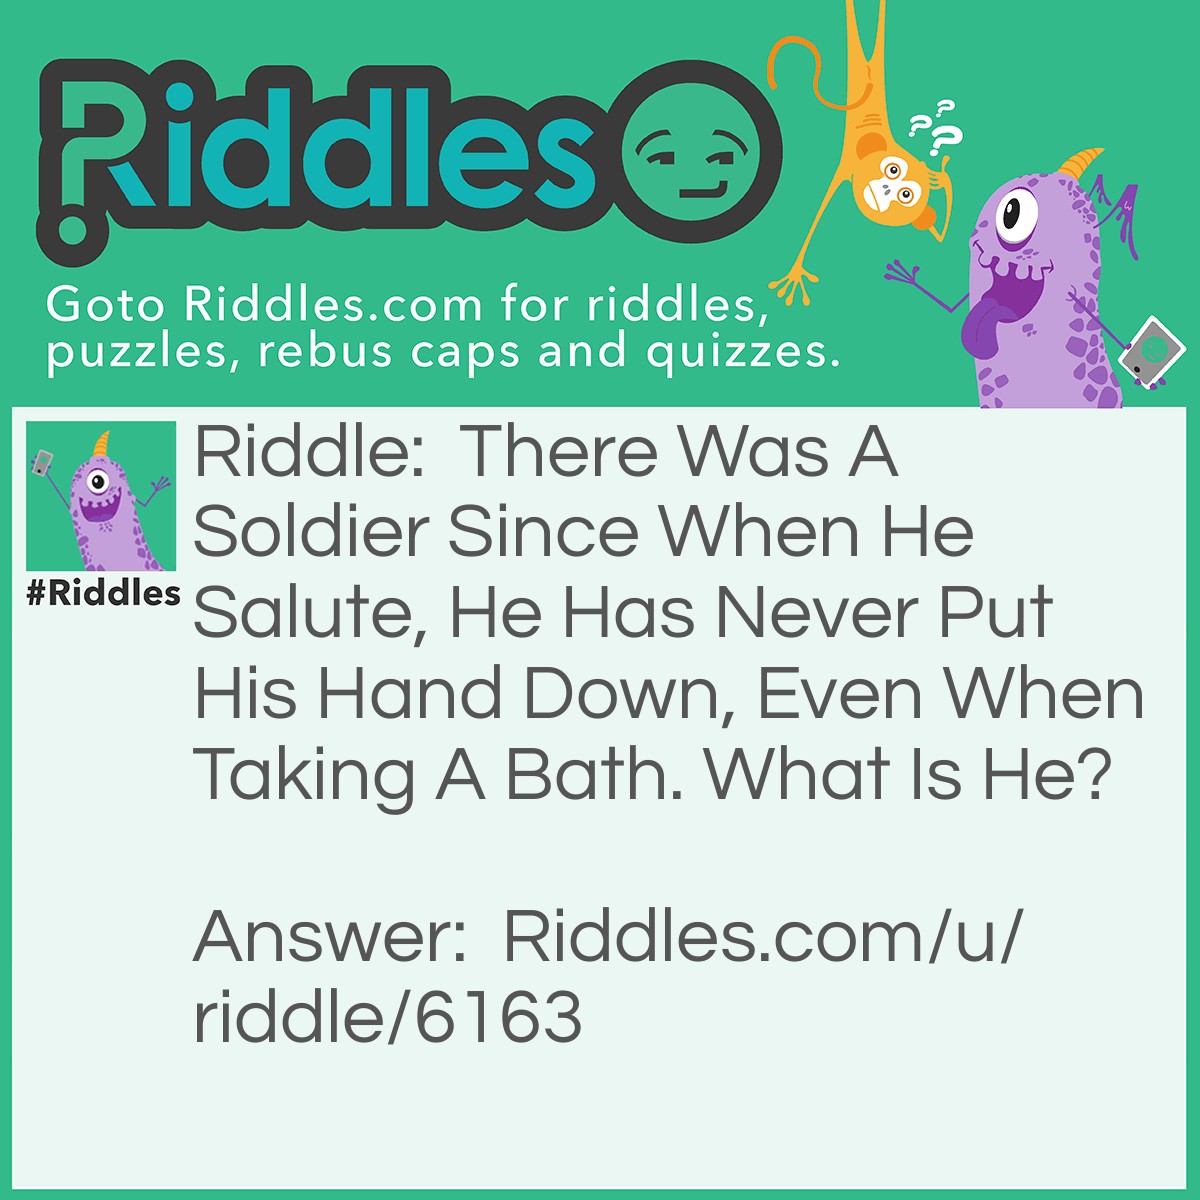 Riddle: There Was A Soldier Since When He Salute, He Has Never Put His Hand Down, Even When Taking A Bath. What Is He? Answer: A Tea Cup.